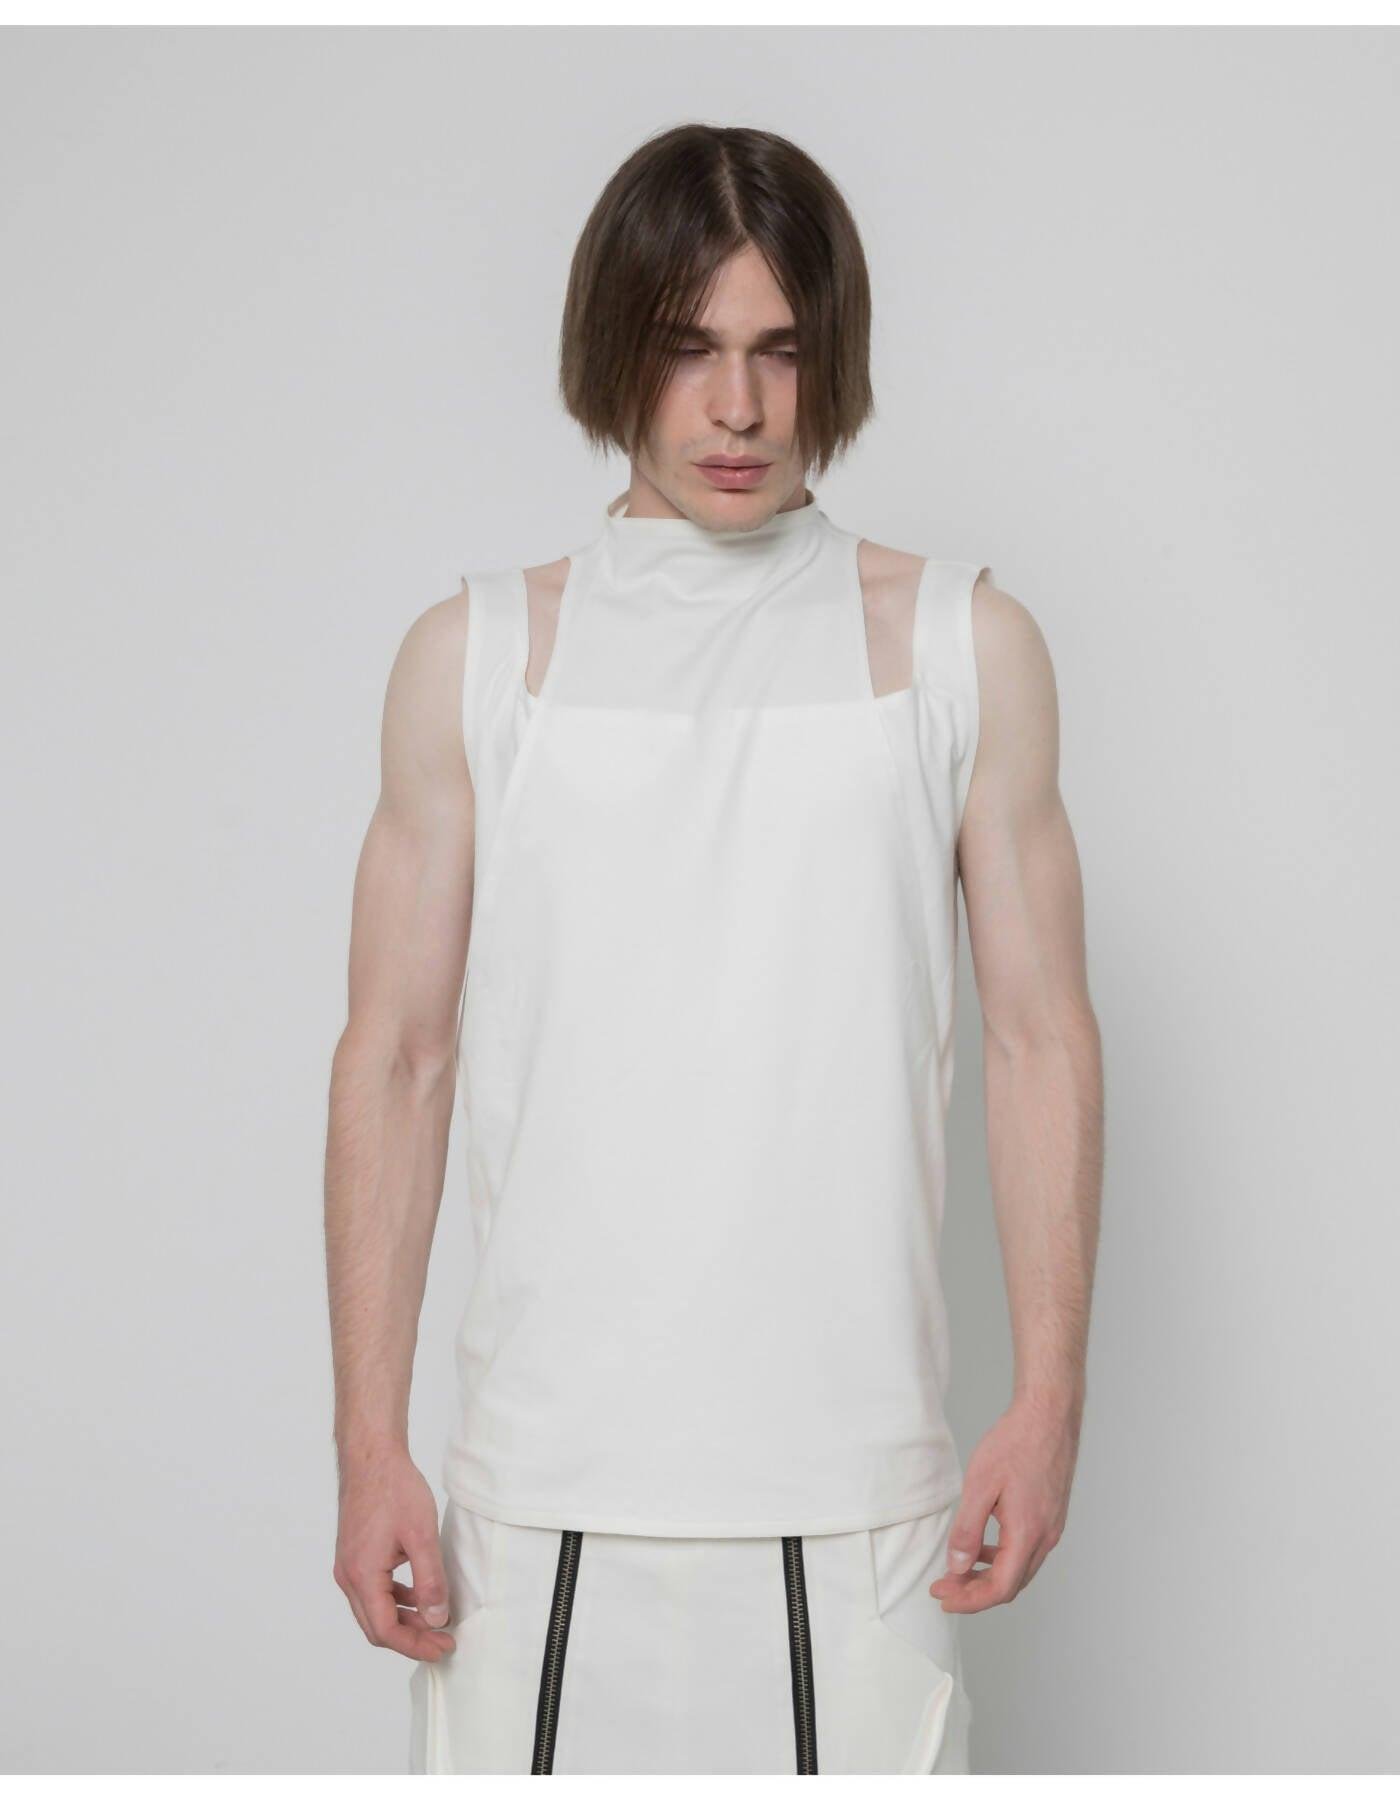 Layered Tank Top by LUNAR LABORATORIES